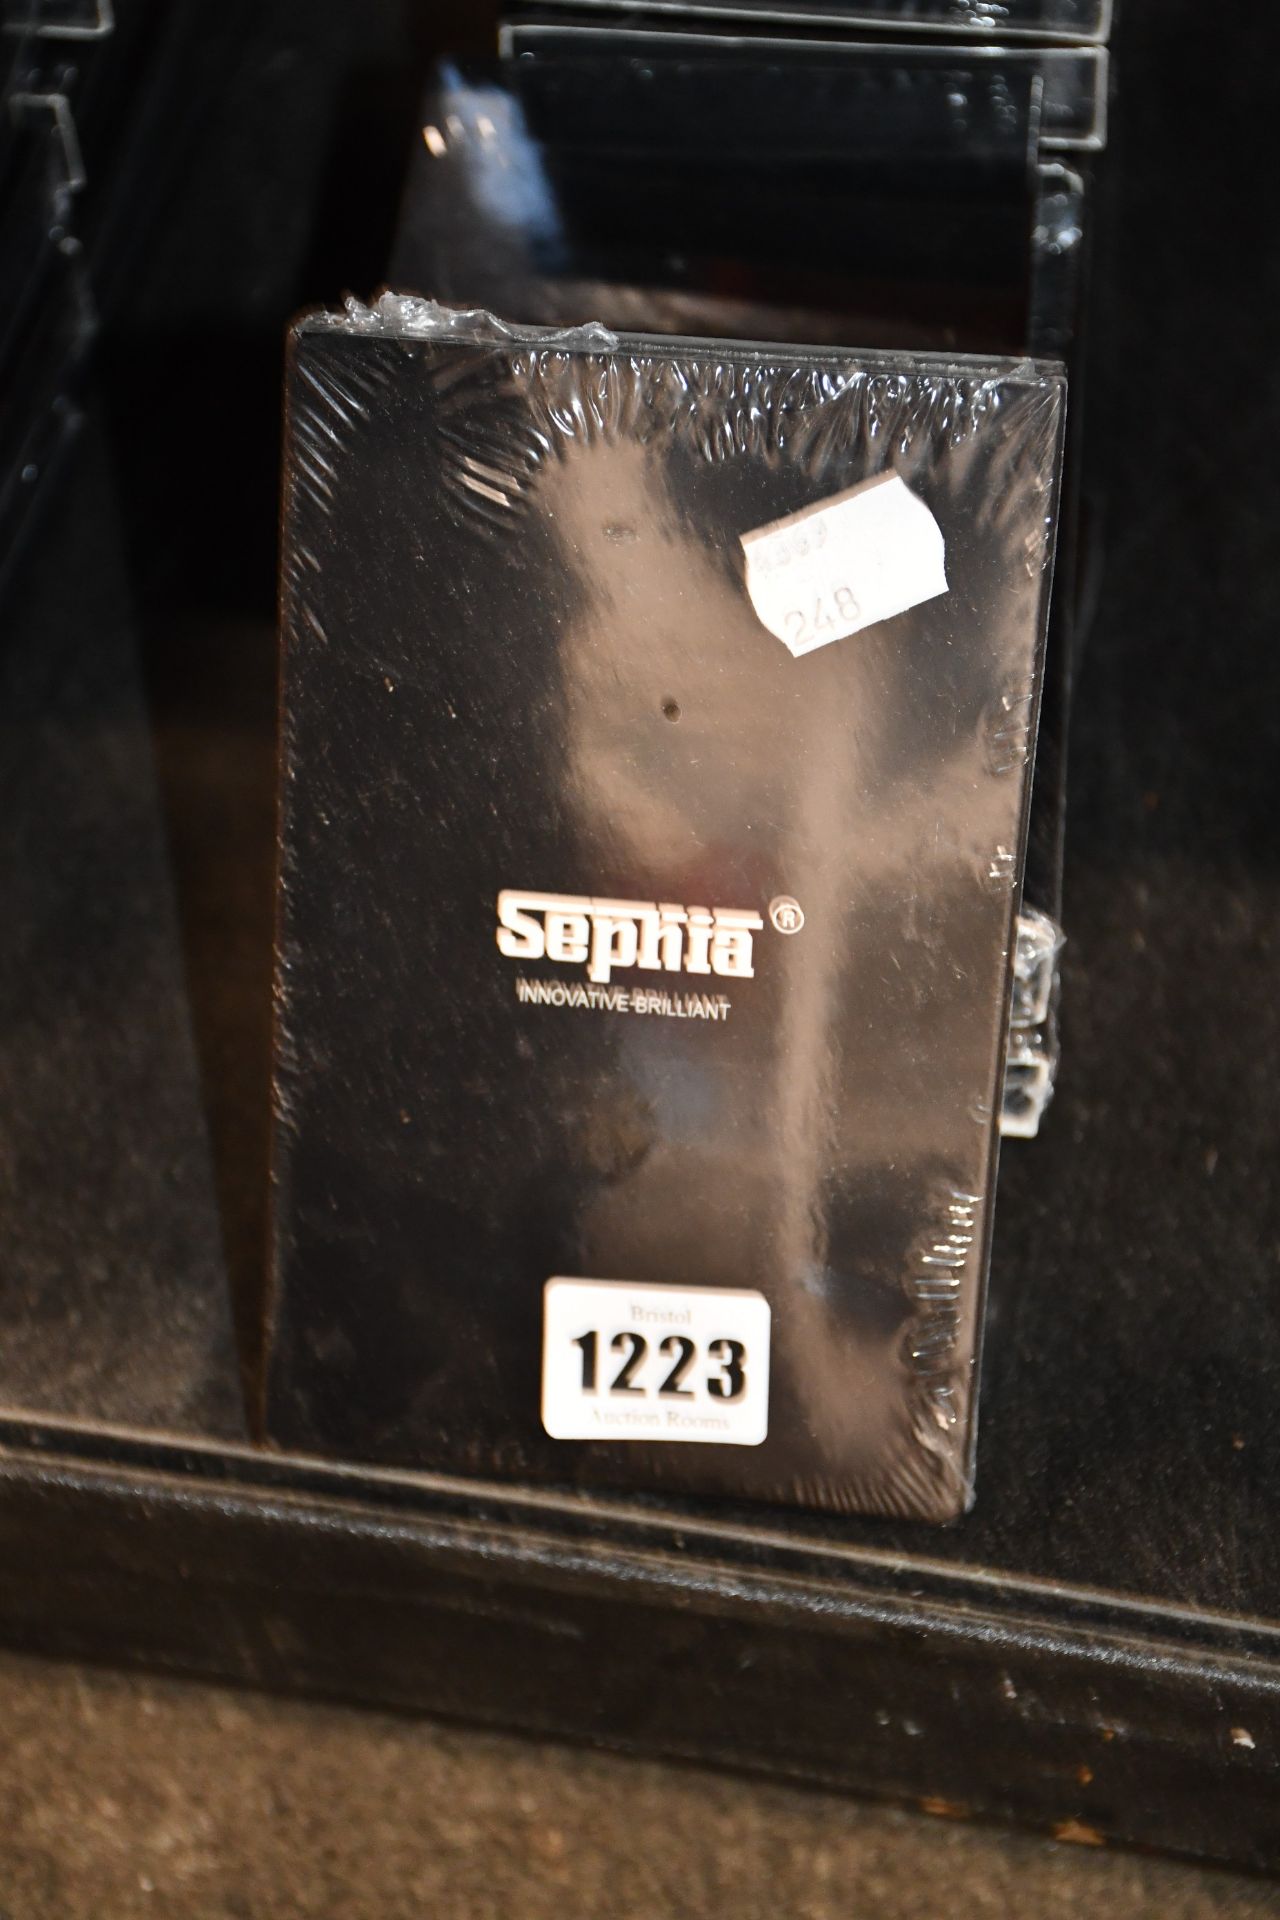 Fourteen boxed as new Sephia SP9090 earphones (Noise isolating in ear headphones with mic and volume